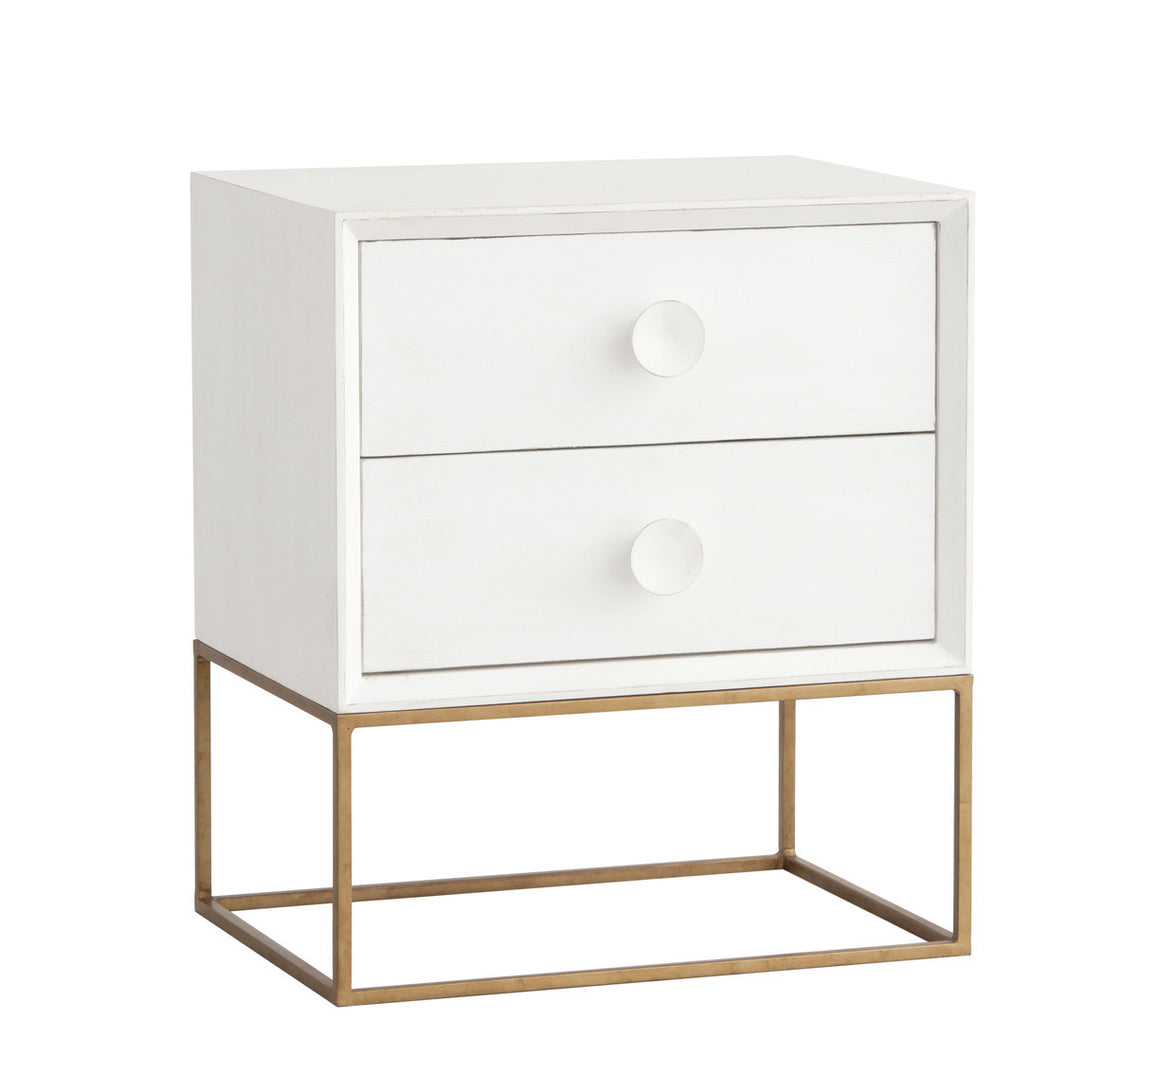 Furniture - Spencer Two Drawer Nightstand - Raw White Cotton ( 28 Finish & 3 Frame Options )